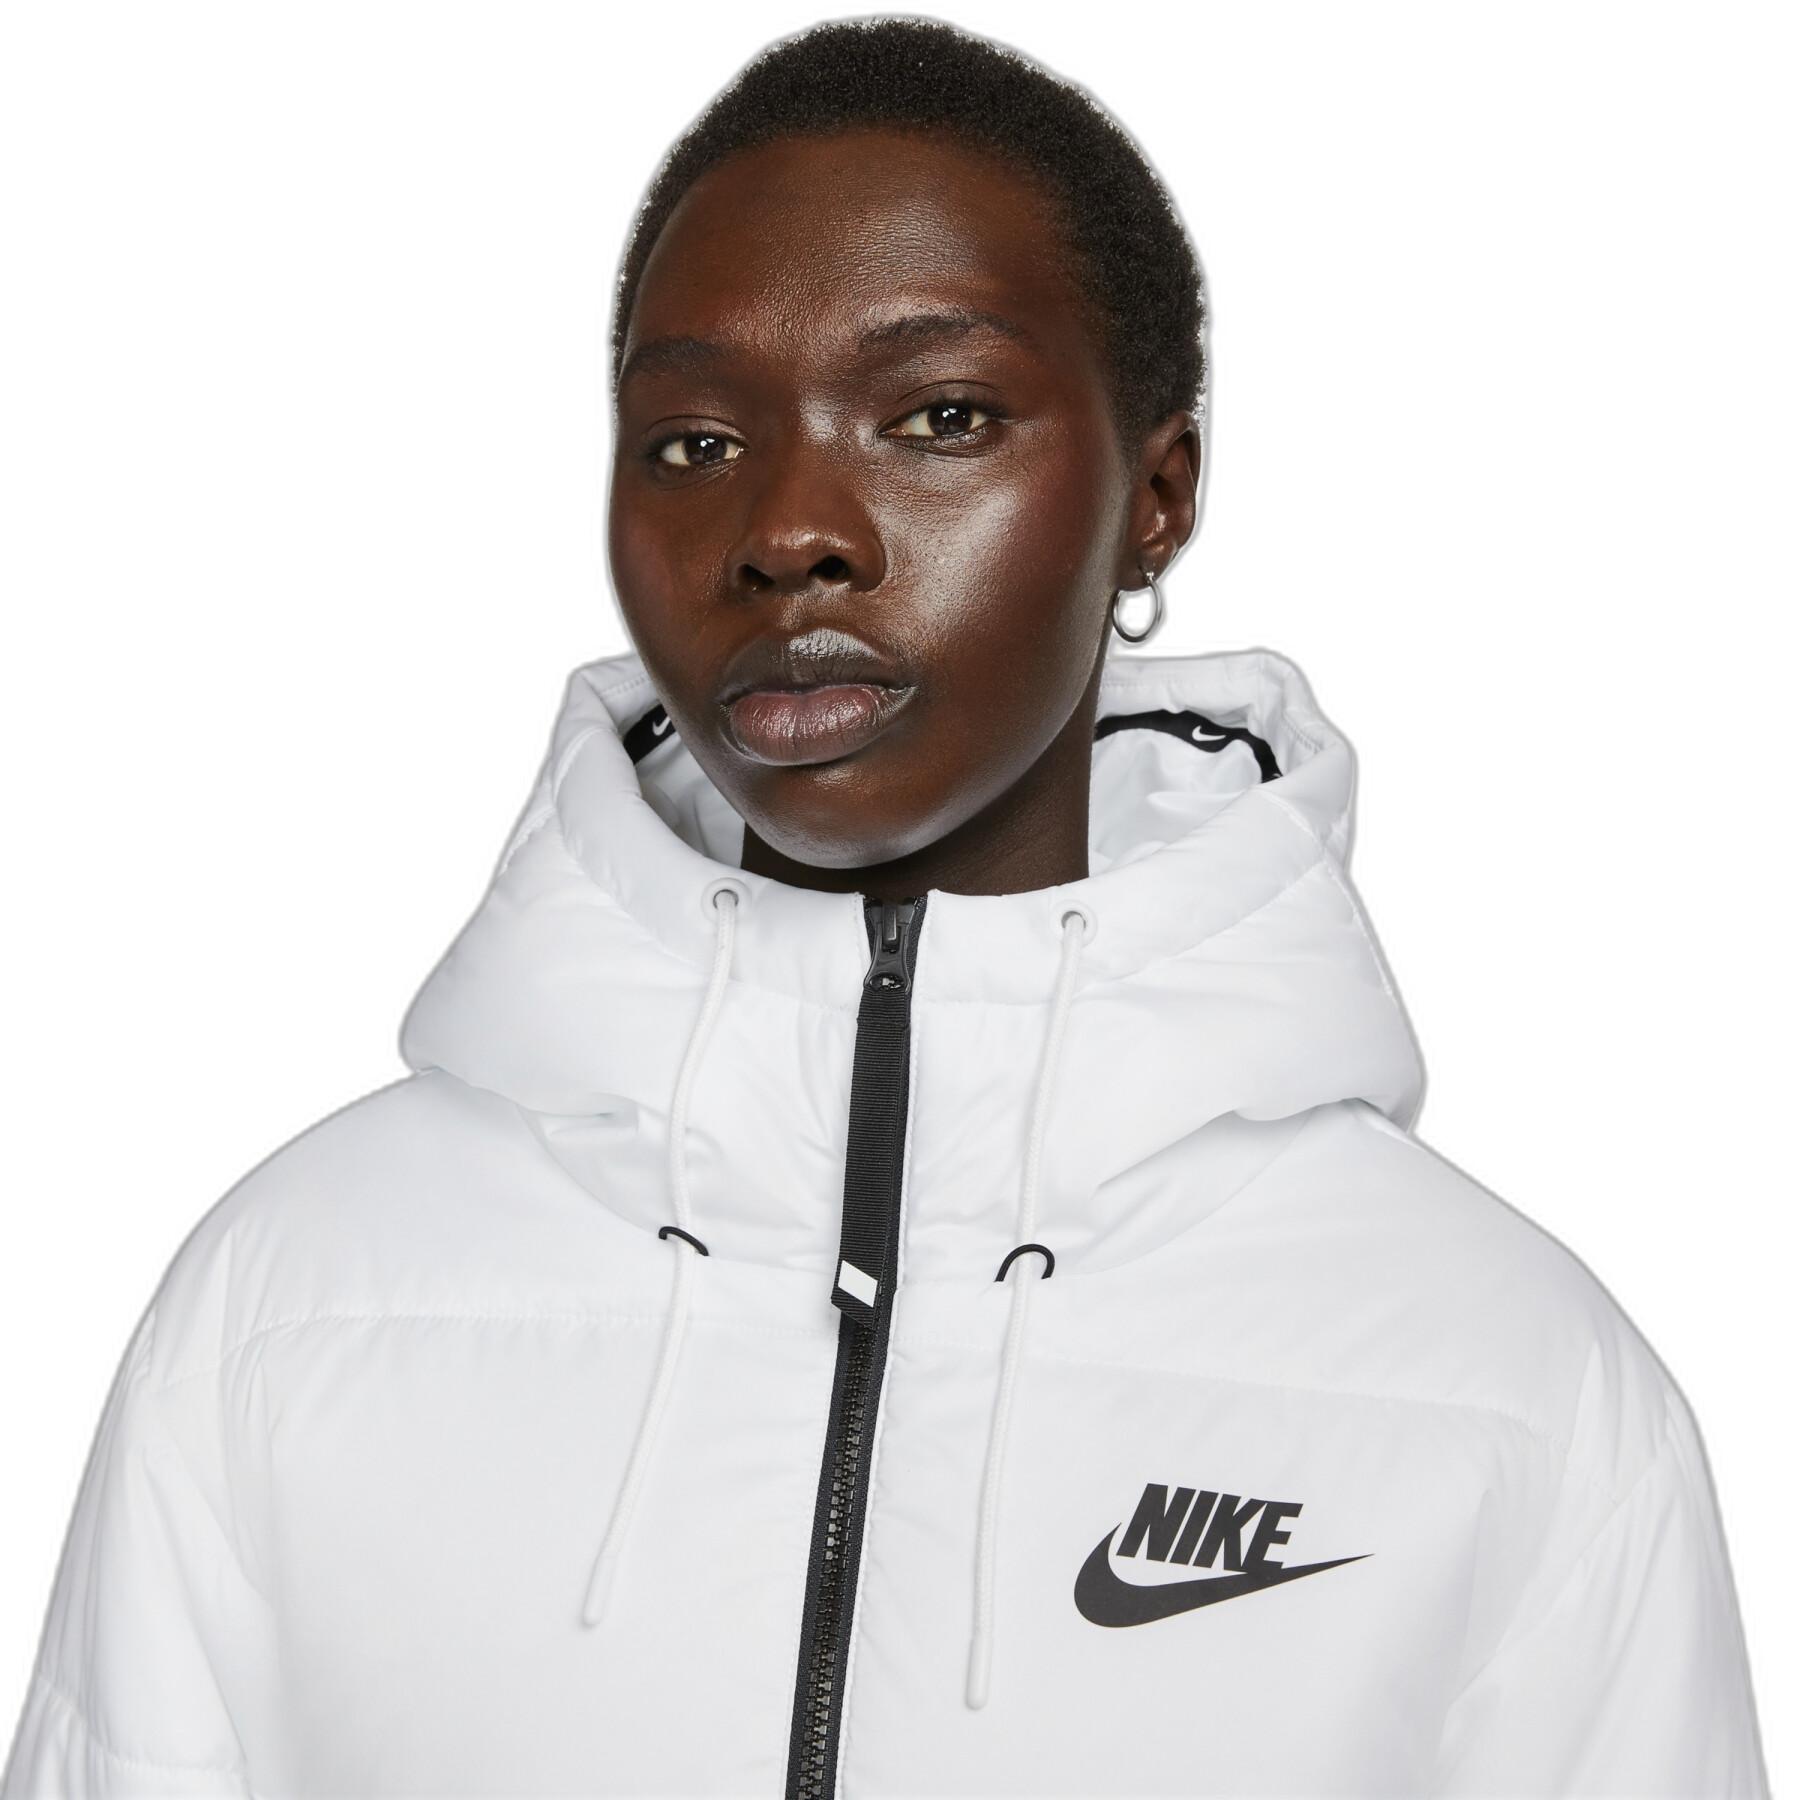 Doudoune femme Nike Sportswear Therma-FIT - Nike - Top Marques